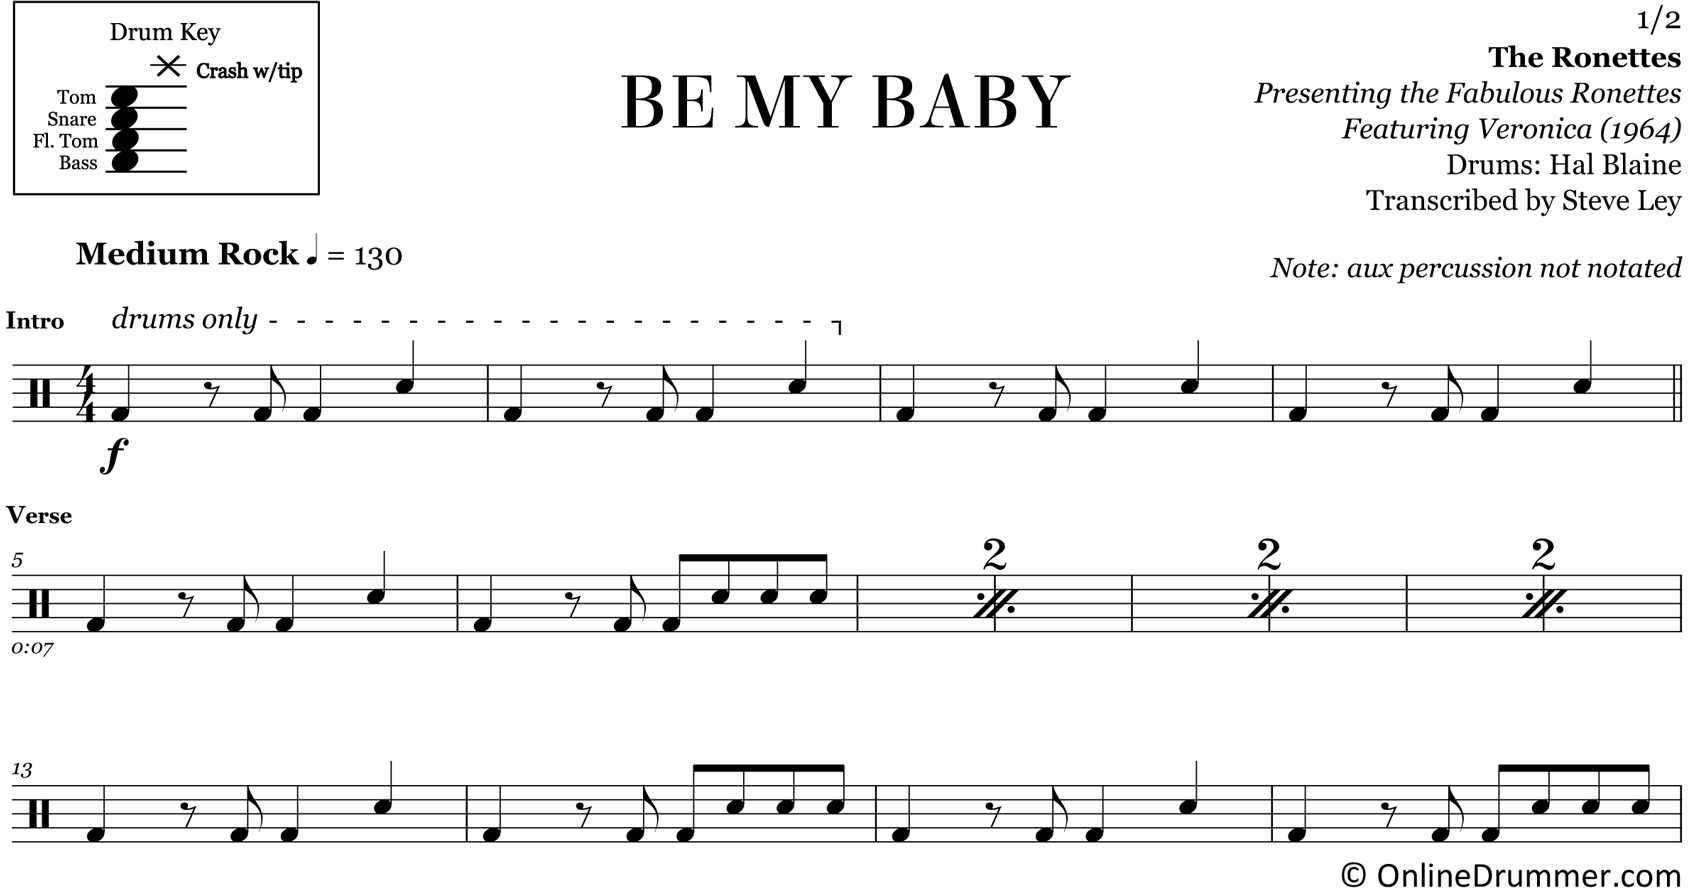 Be My Baby - The Ronettes - Drum Sheet Music